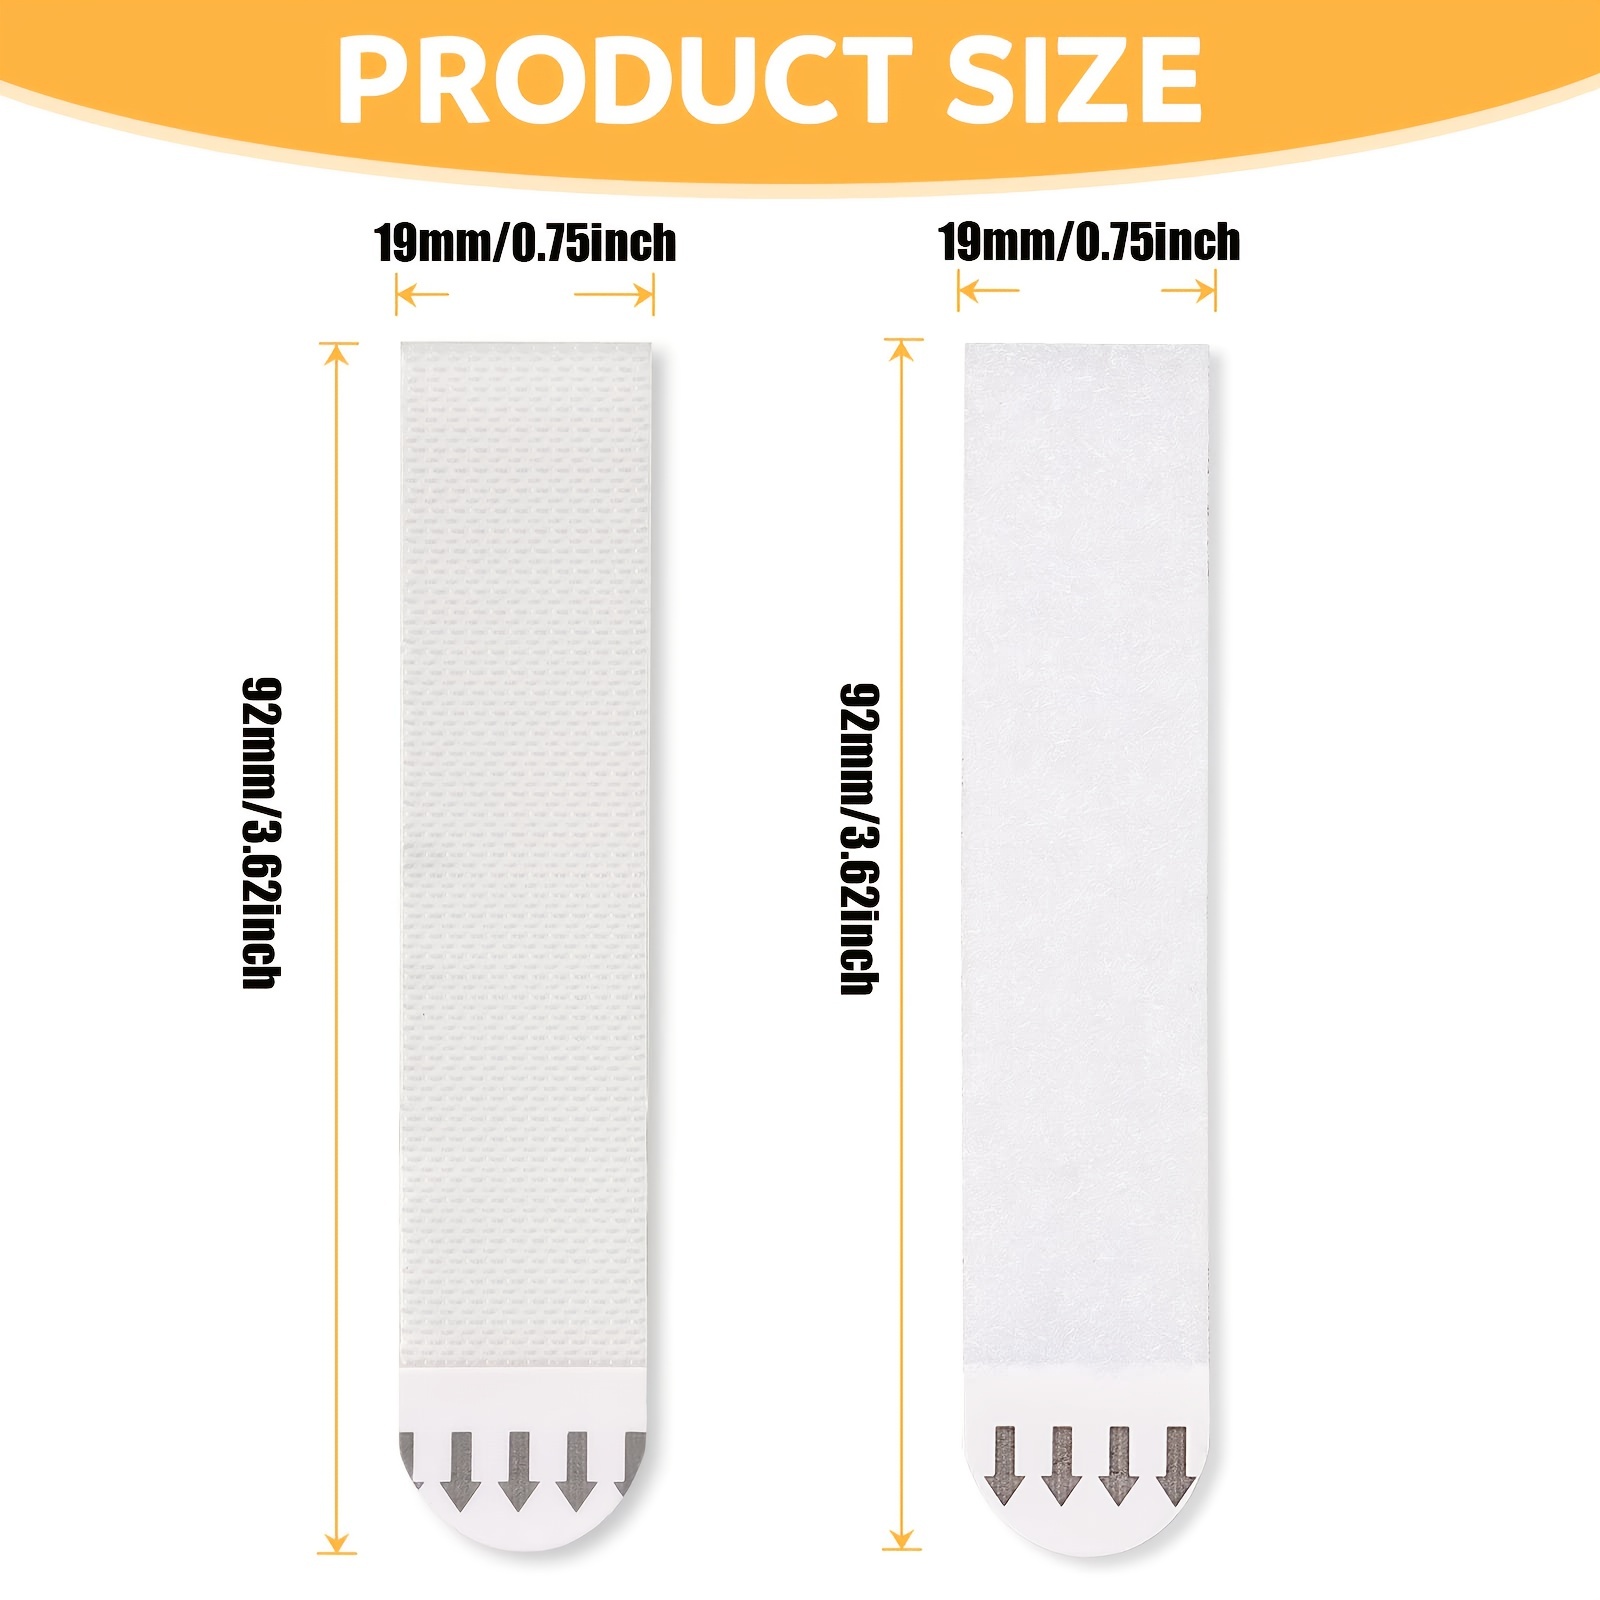 Command Large Picture-Hanging Strips, White, 12-Strip